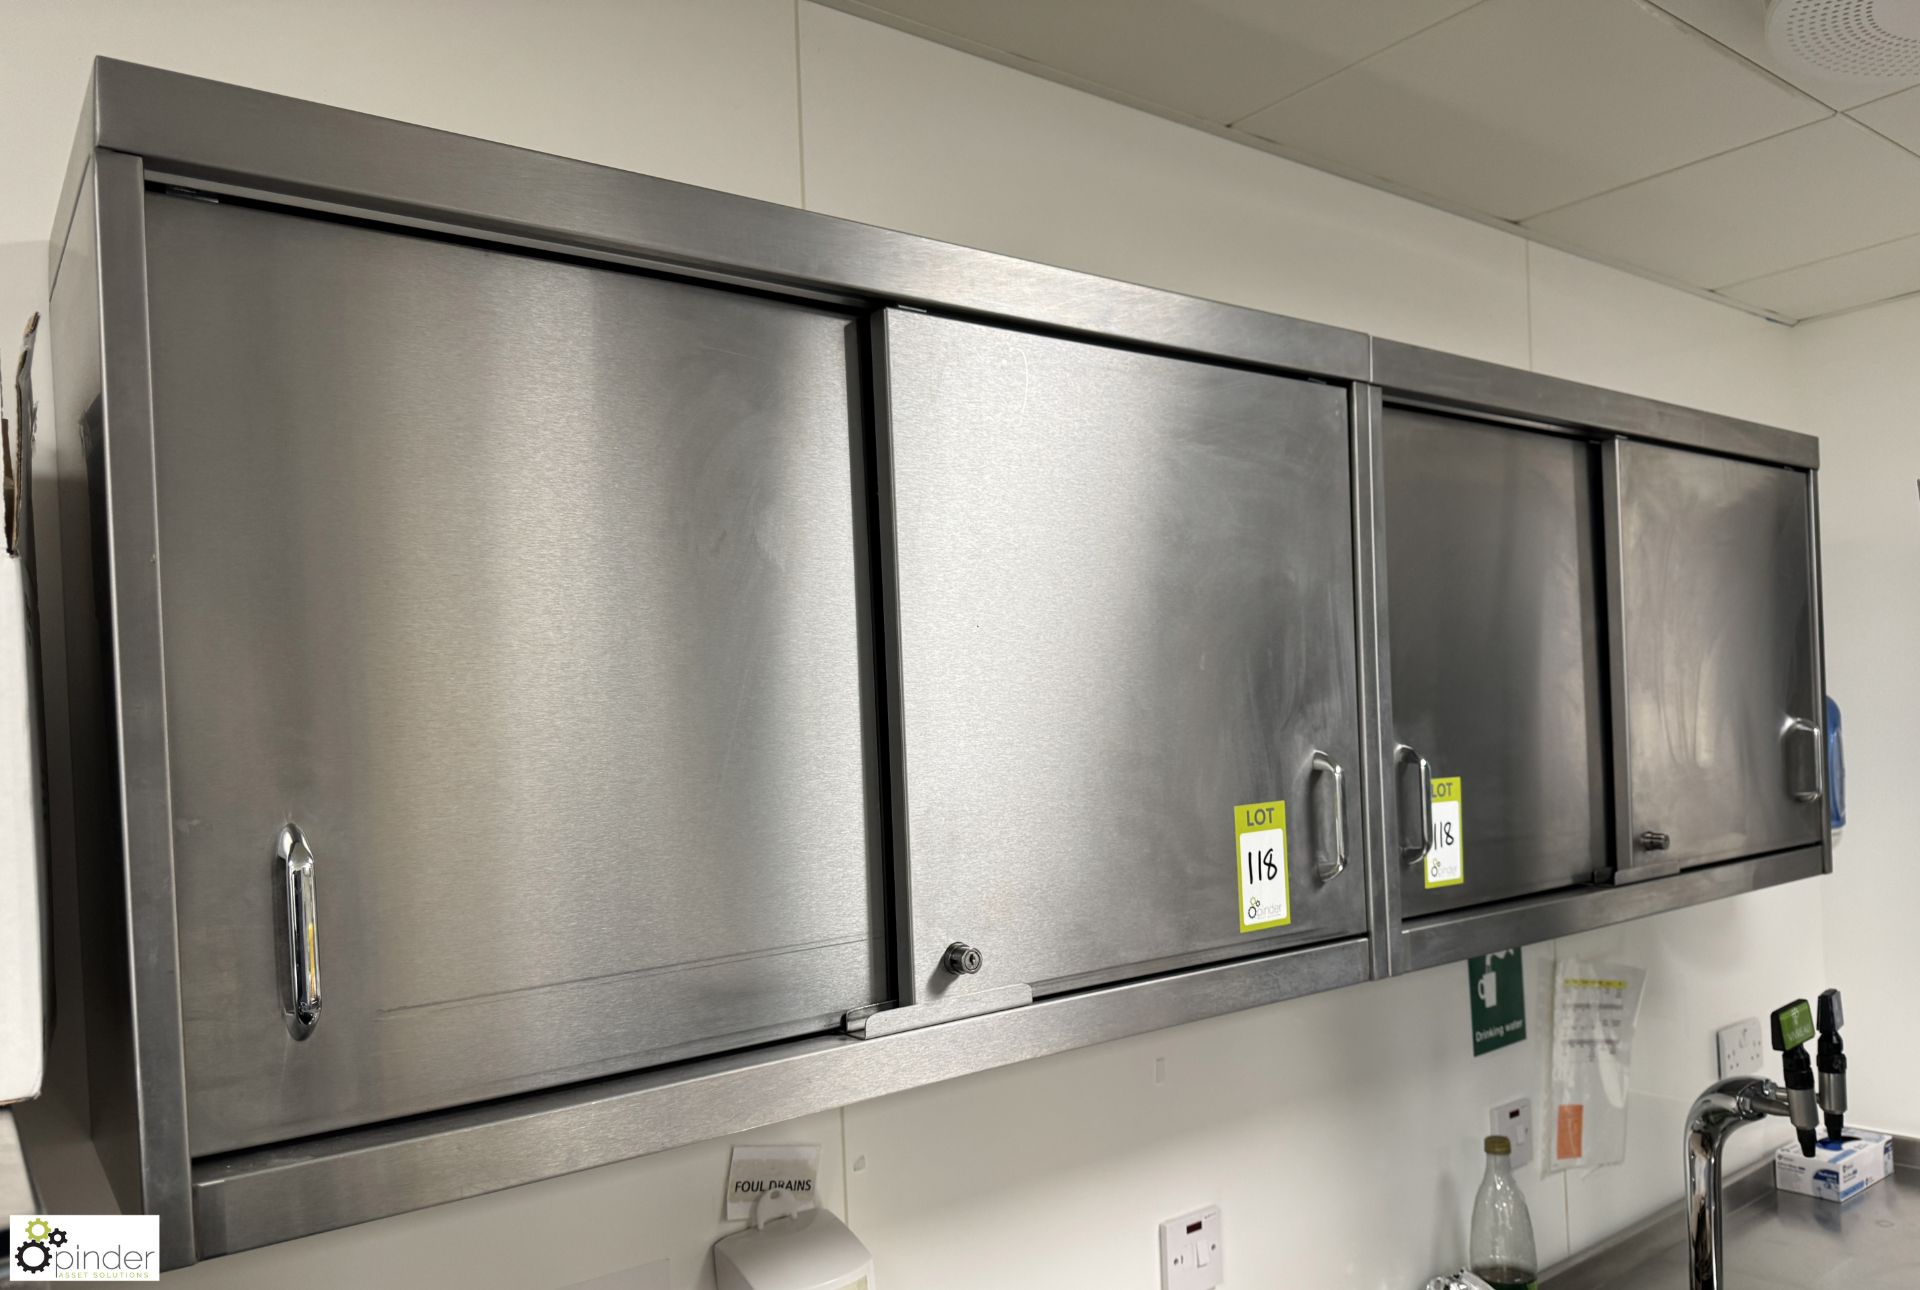 2 stainless steel wall mounted Cabinets, 1000mm x 300mm x 600mm (location in building - level 7) - Image 2 of 5